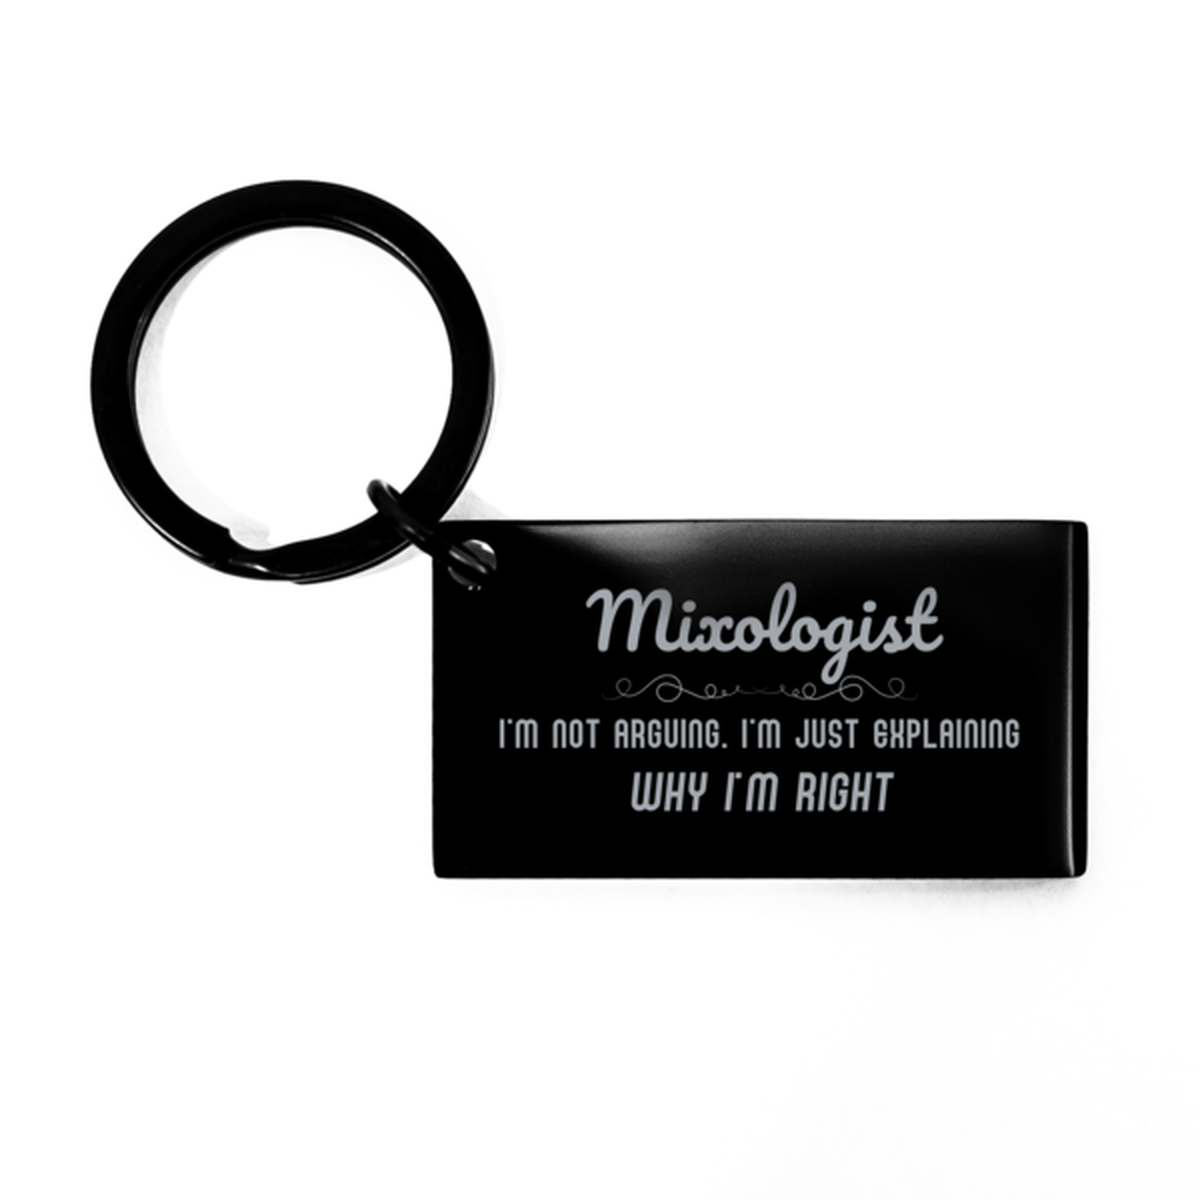 Mixologist I'm not Arguing. I'm Just Explaining Why I'm RIGHT Keychain, Funny Saying Quote Mixologist Gifts For Mixologist Graduation Birthday Christmas Gifts for Men Women Coworker